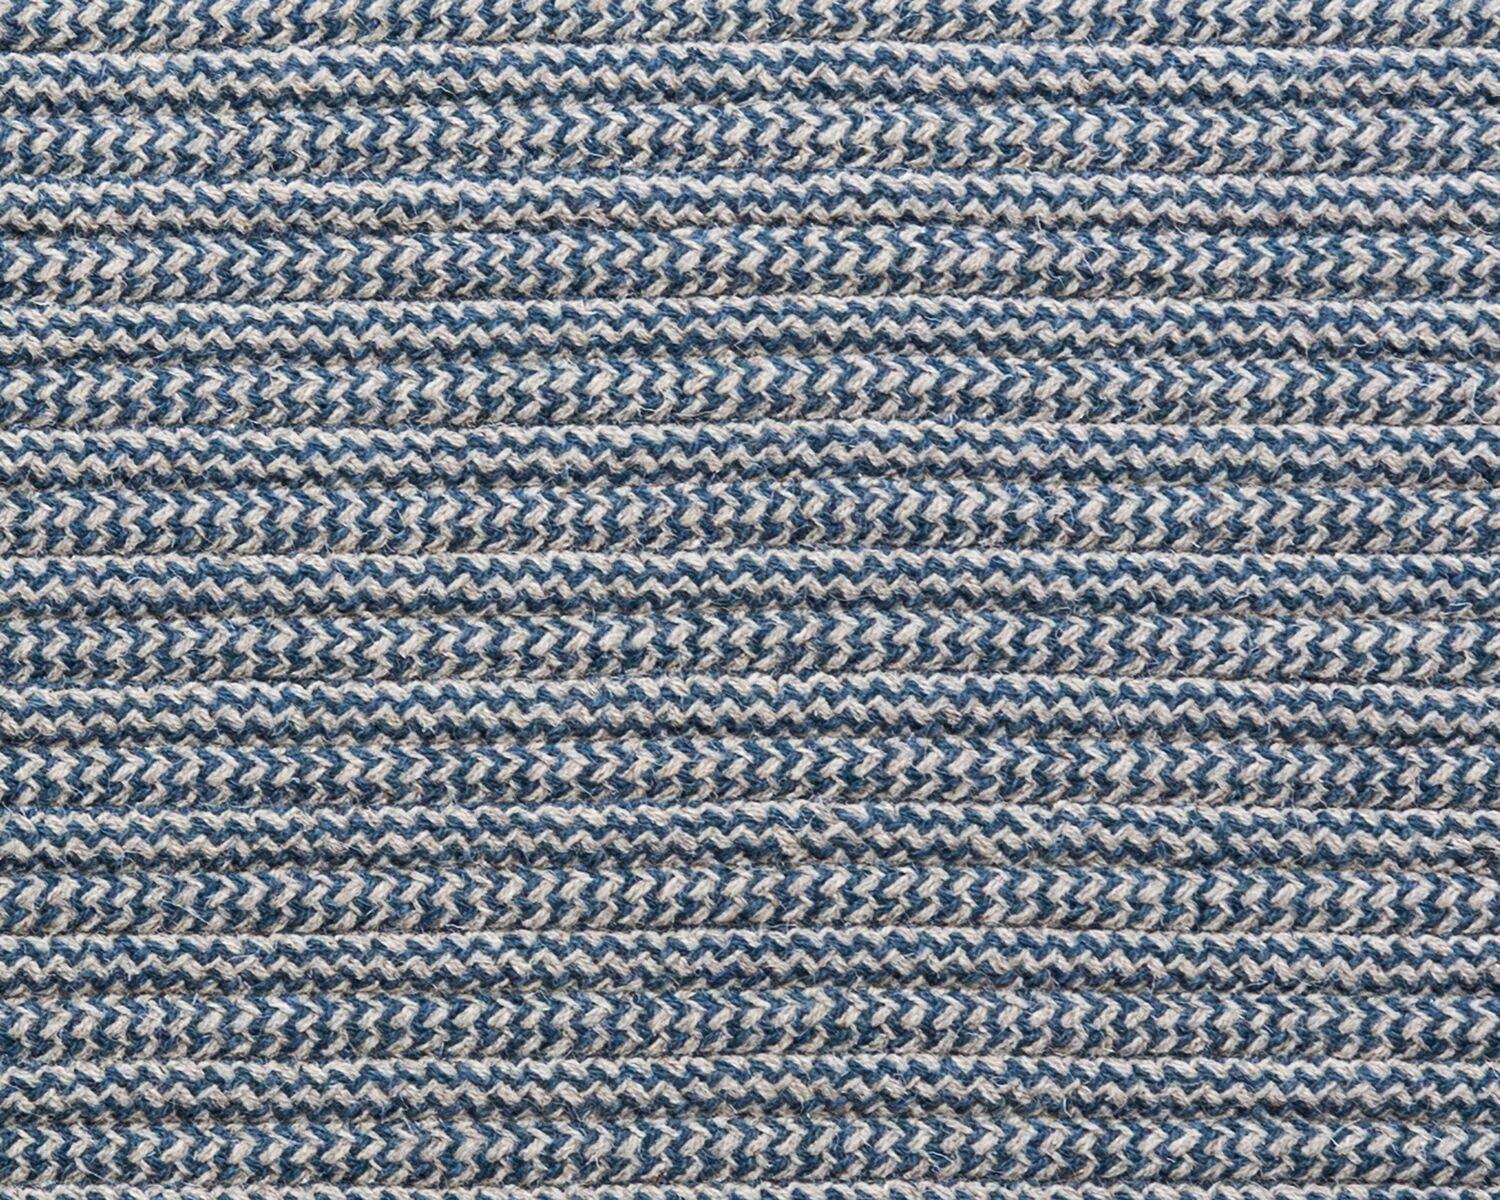 Our Franco wool rug in blue is created by alternating styles of cable-woven braid. Textured variations occur by combining blue wool blend with a neutral base of light grey natural un-dyed wool. Designed in the Thayer Design Studio (Best of Houzz